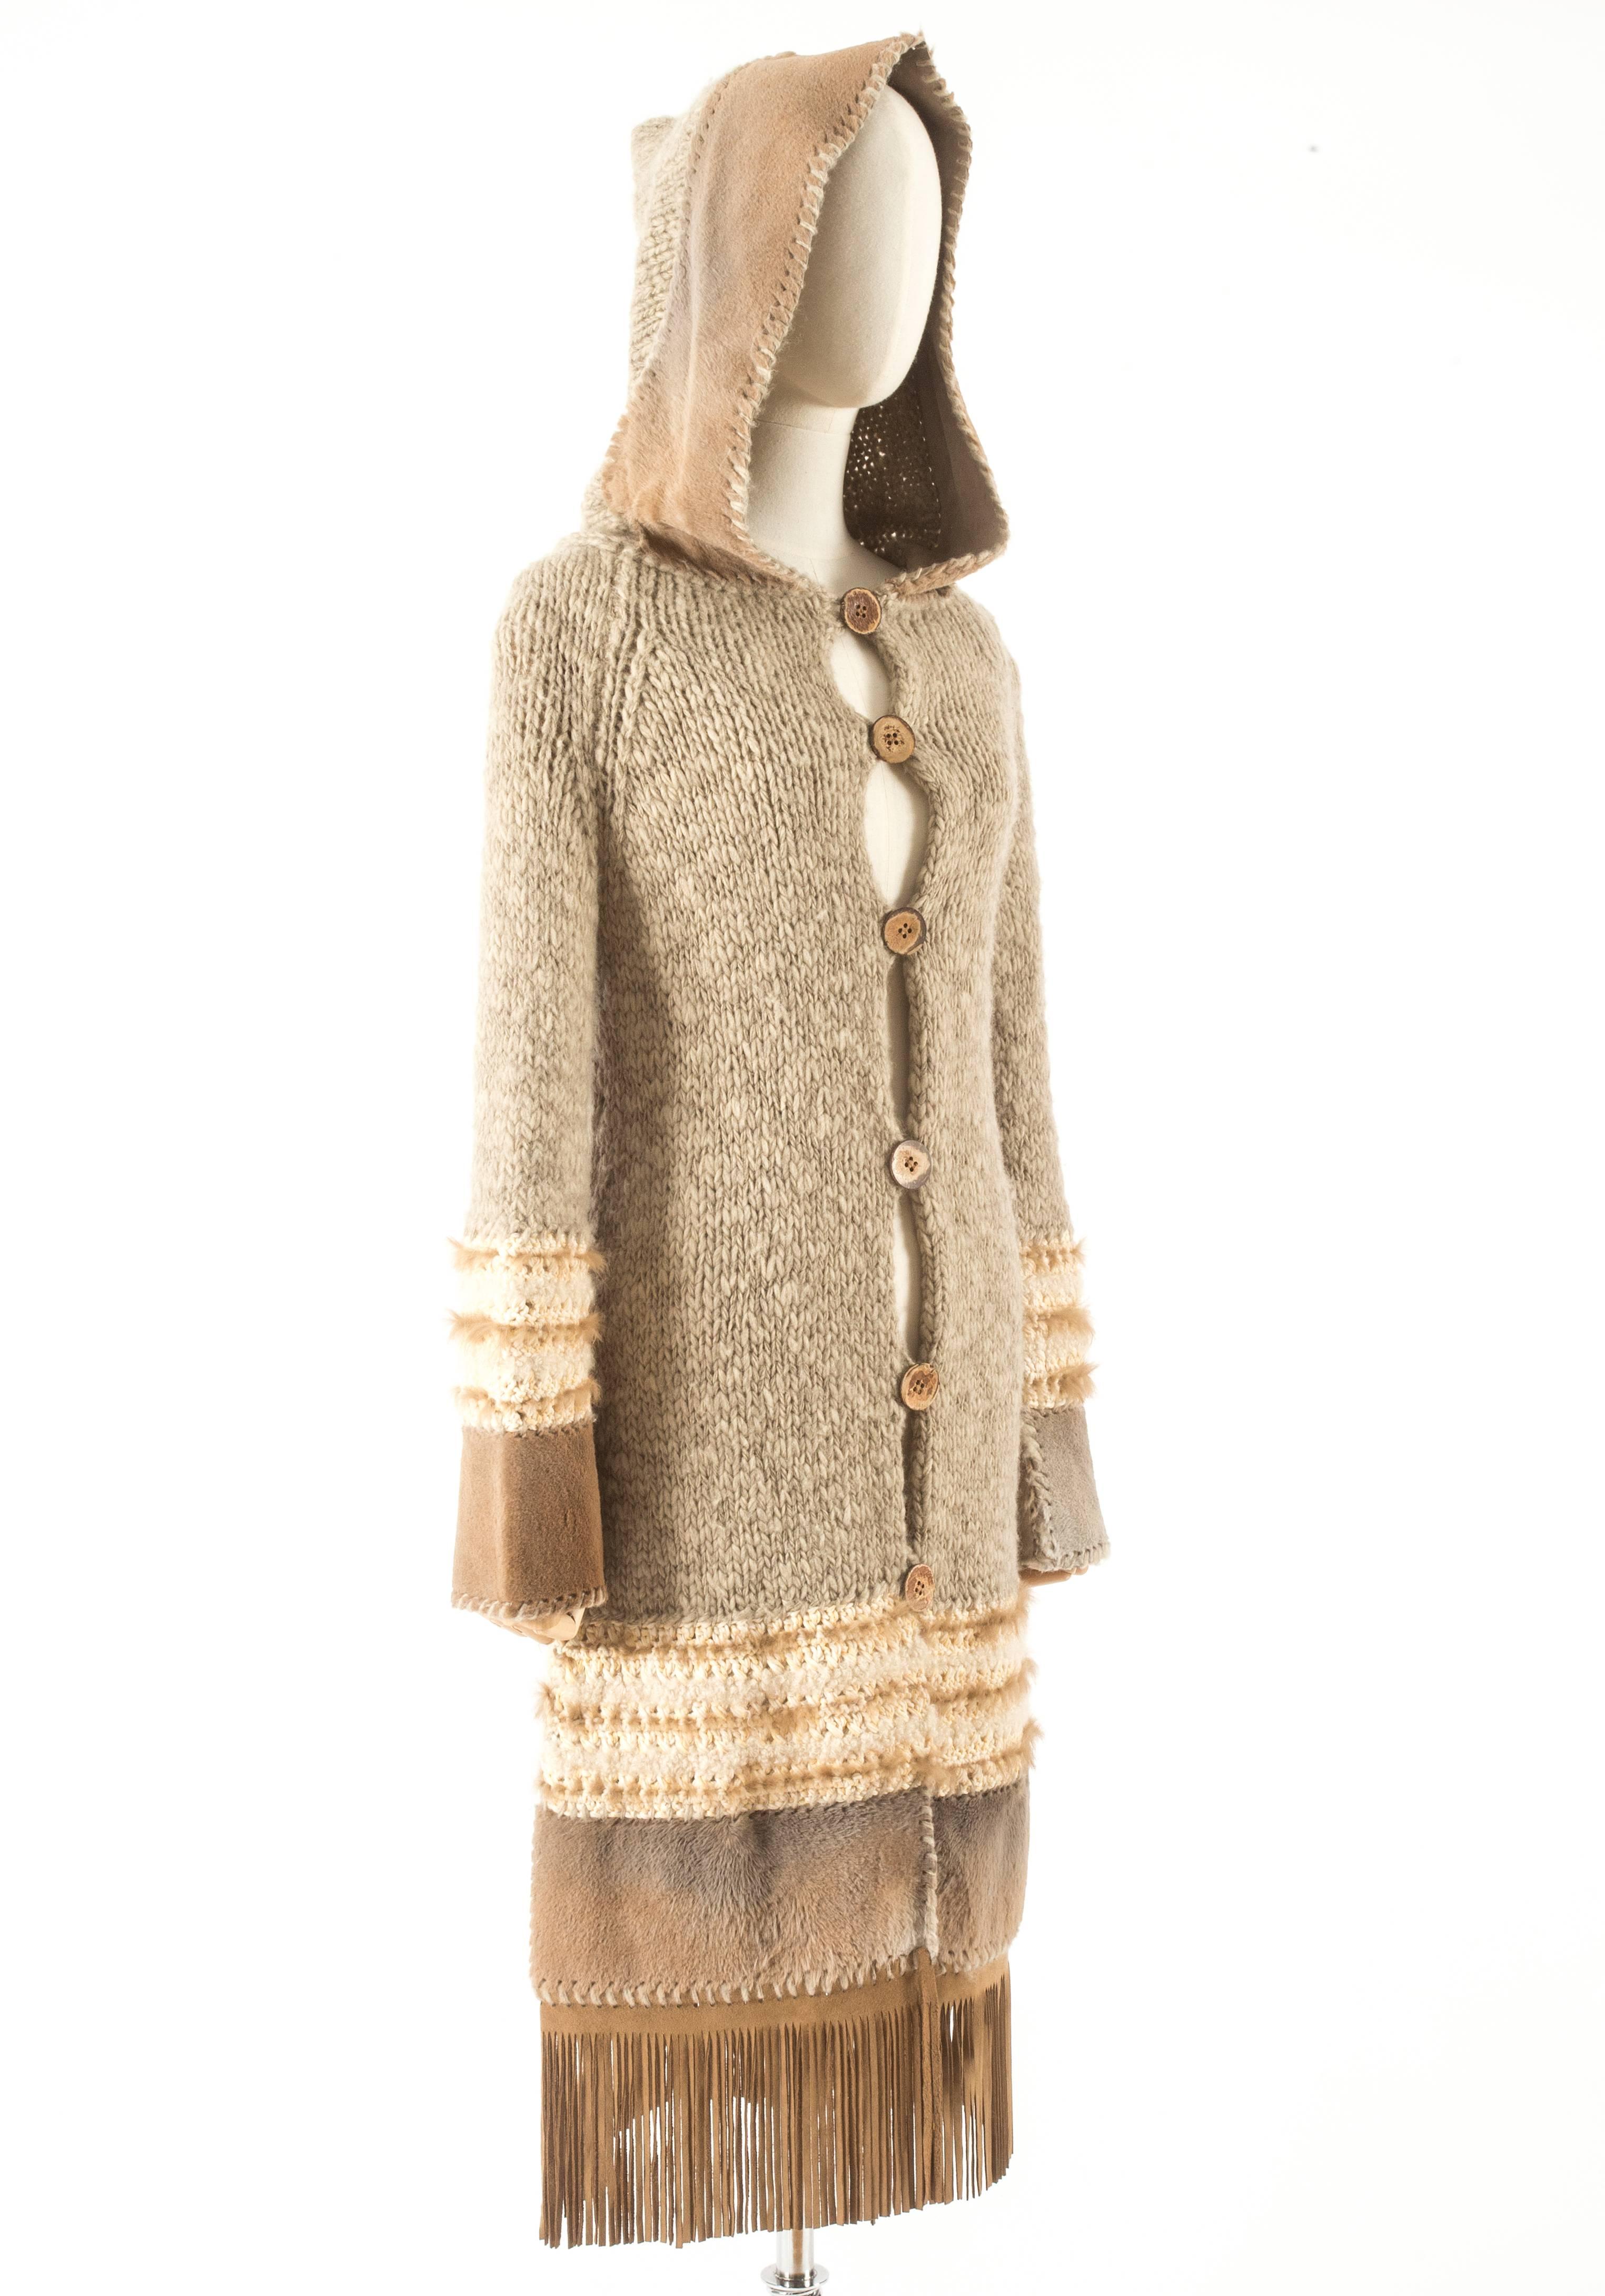 John Galliano for Christian Dior hooded oatmeal knitted jacket with rabbit fur, suede tassels and wooden buttons